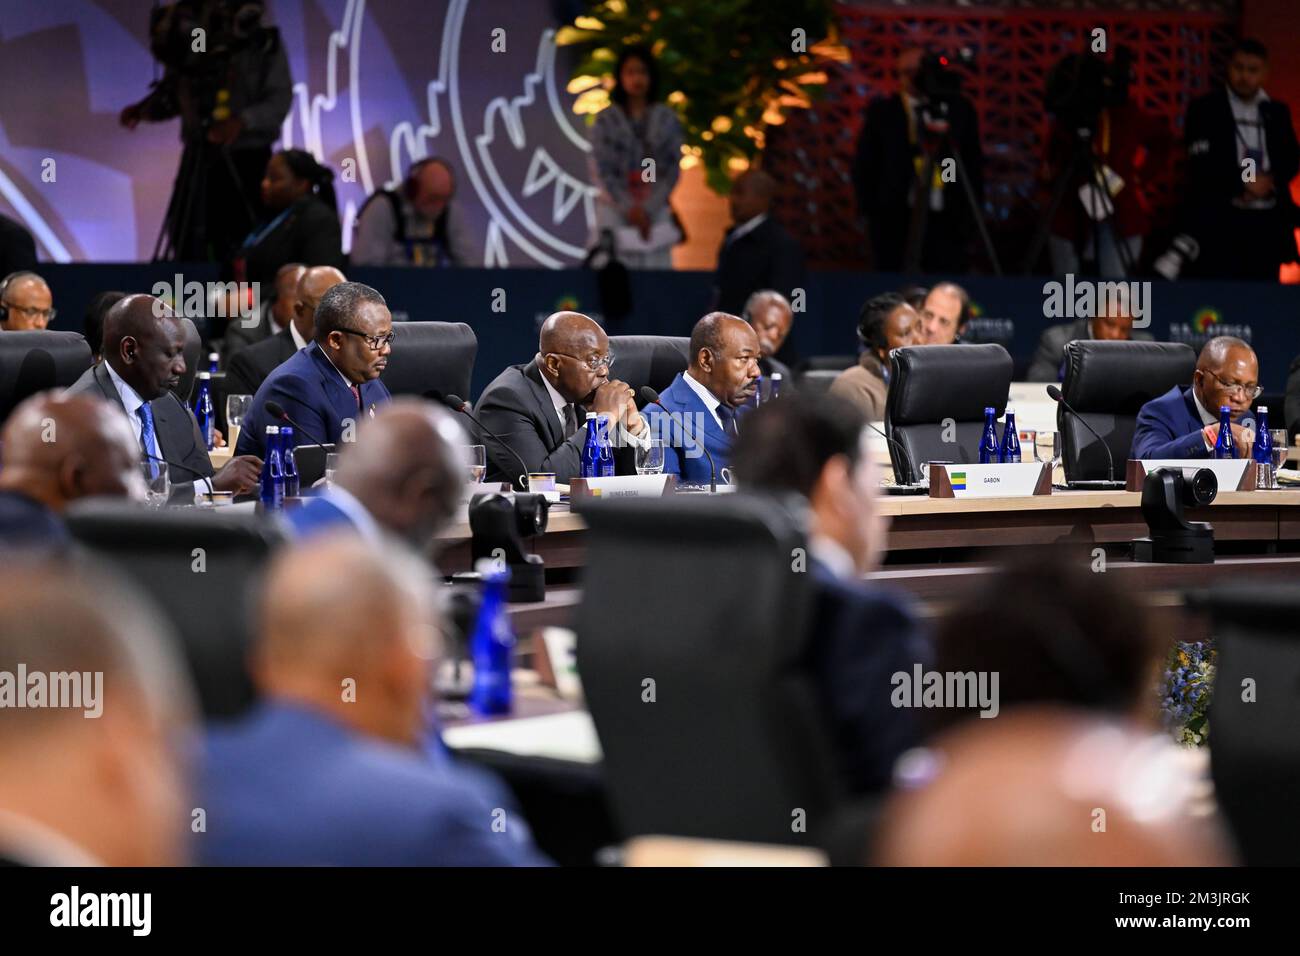 Washington, United States. 15th Dec, 2022. African leaders listen during the first Plenary leaders session of the U.S - Africa Leaders Summit at the Walter Washington Convention Center, December 15, 2022 in Washington, DC Credit: Ben Solomon/US State Department/Alamy Live News Stock Photo